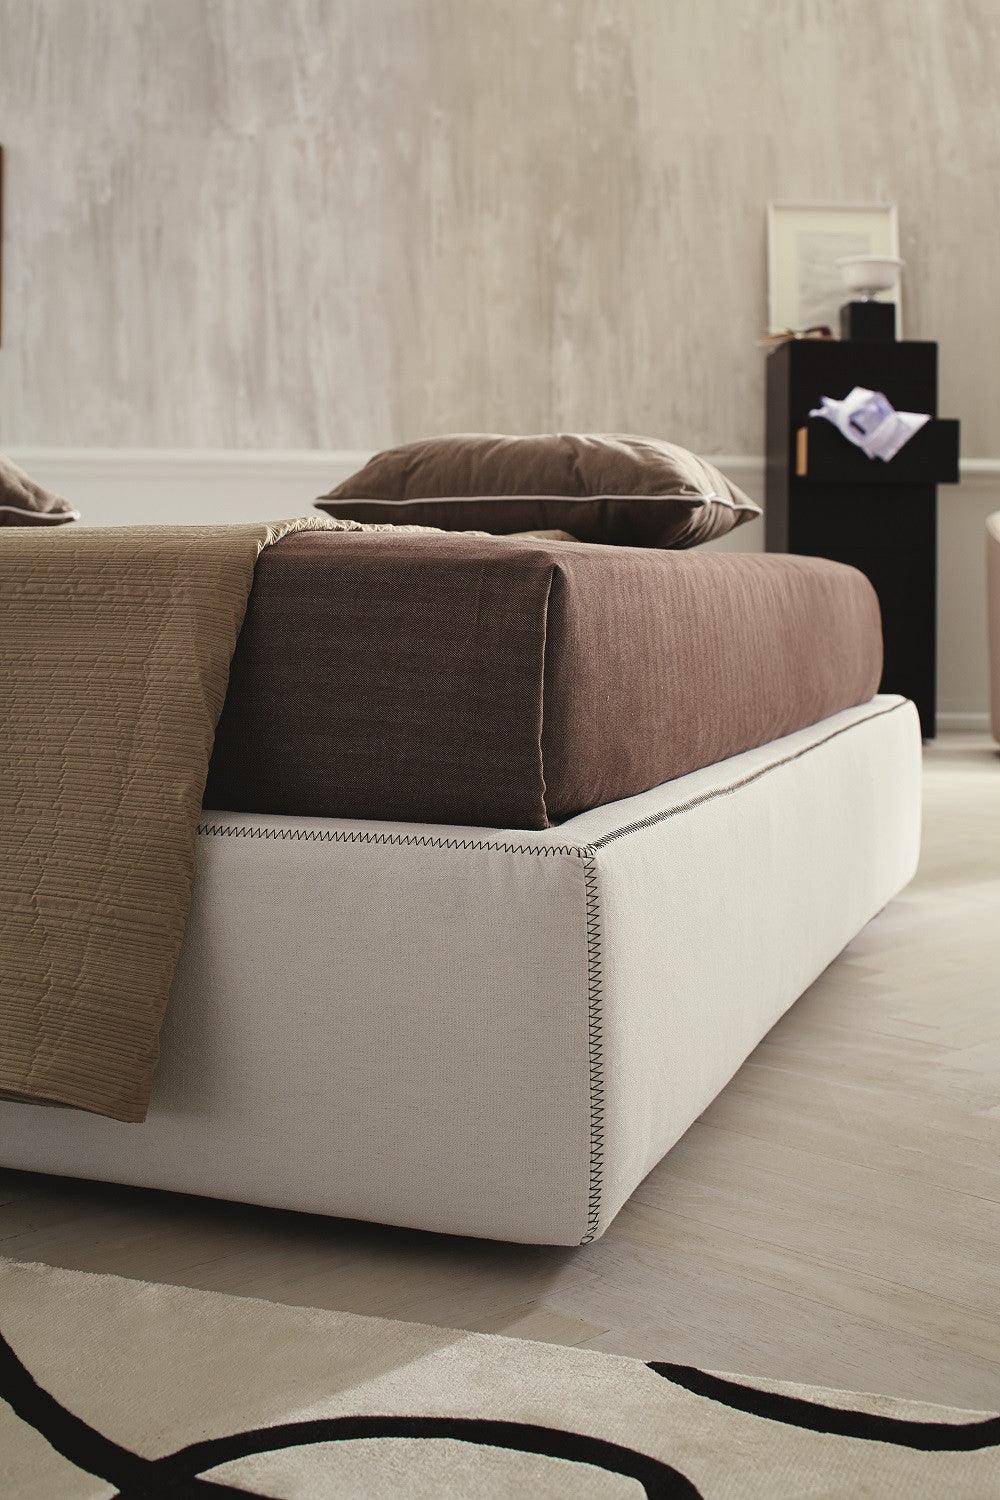 Clay Storage Bed - Euro Living Furniture